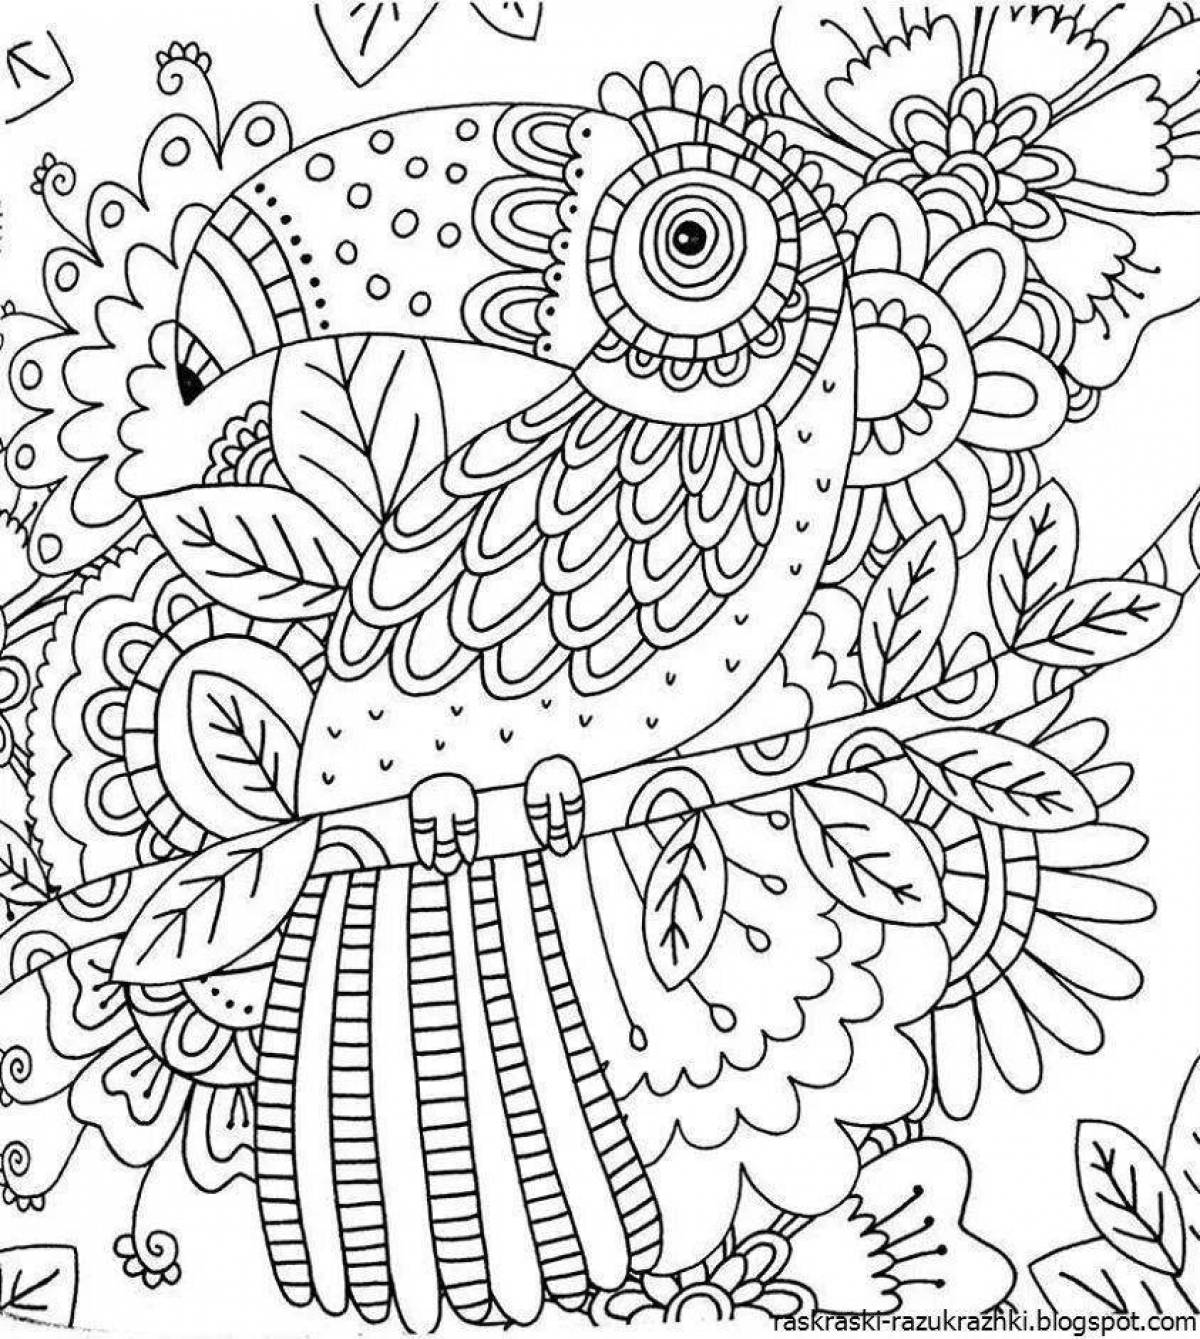 Exciting color anti-stress coloring book for children 10 years old